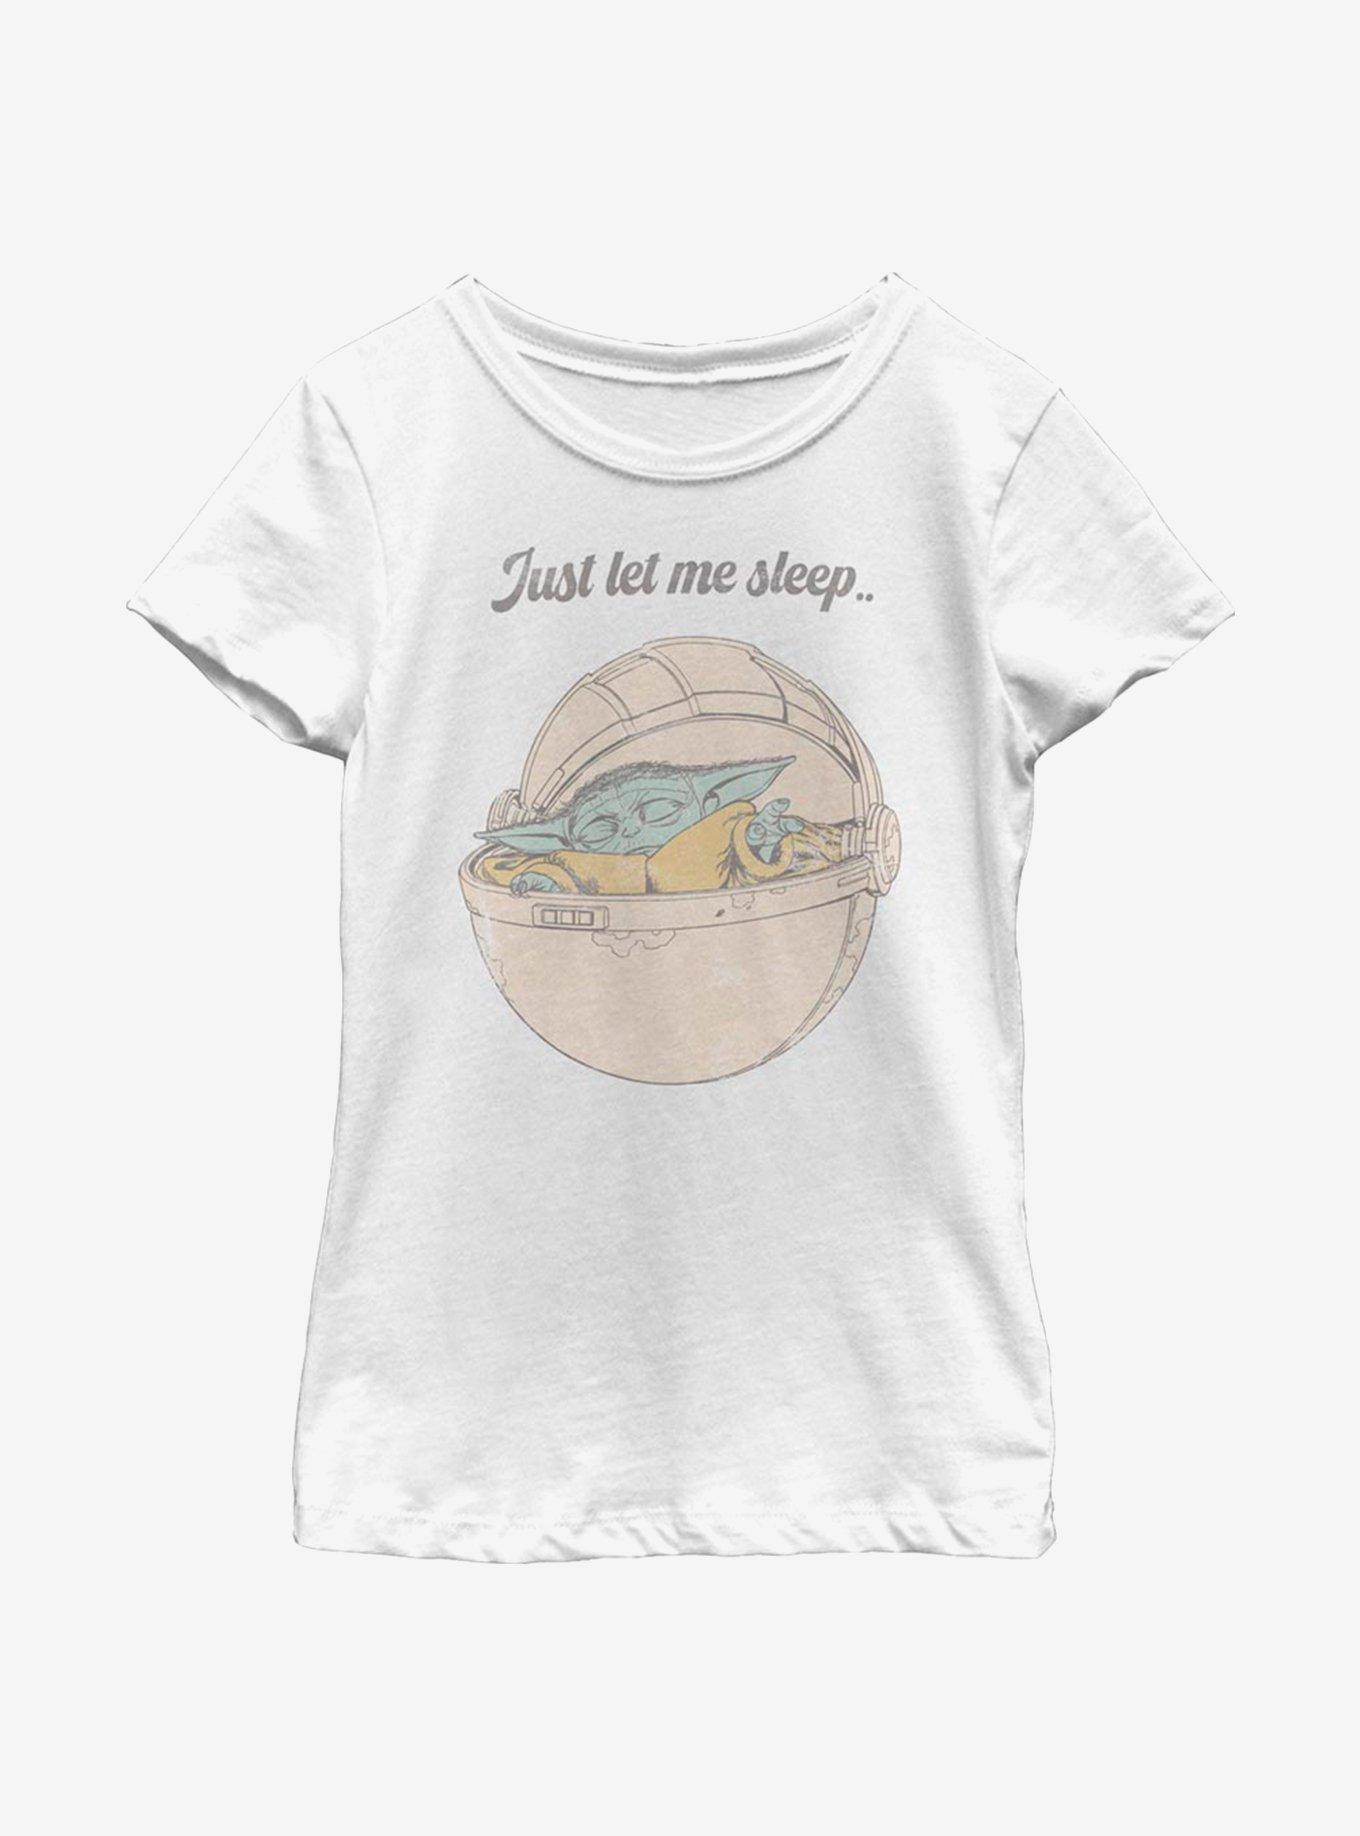 Star Wars The Mandalorian The Child Let Me Sleep Youth Girls T-Shirt, WHITE, hi-res